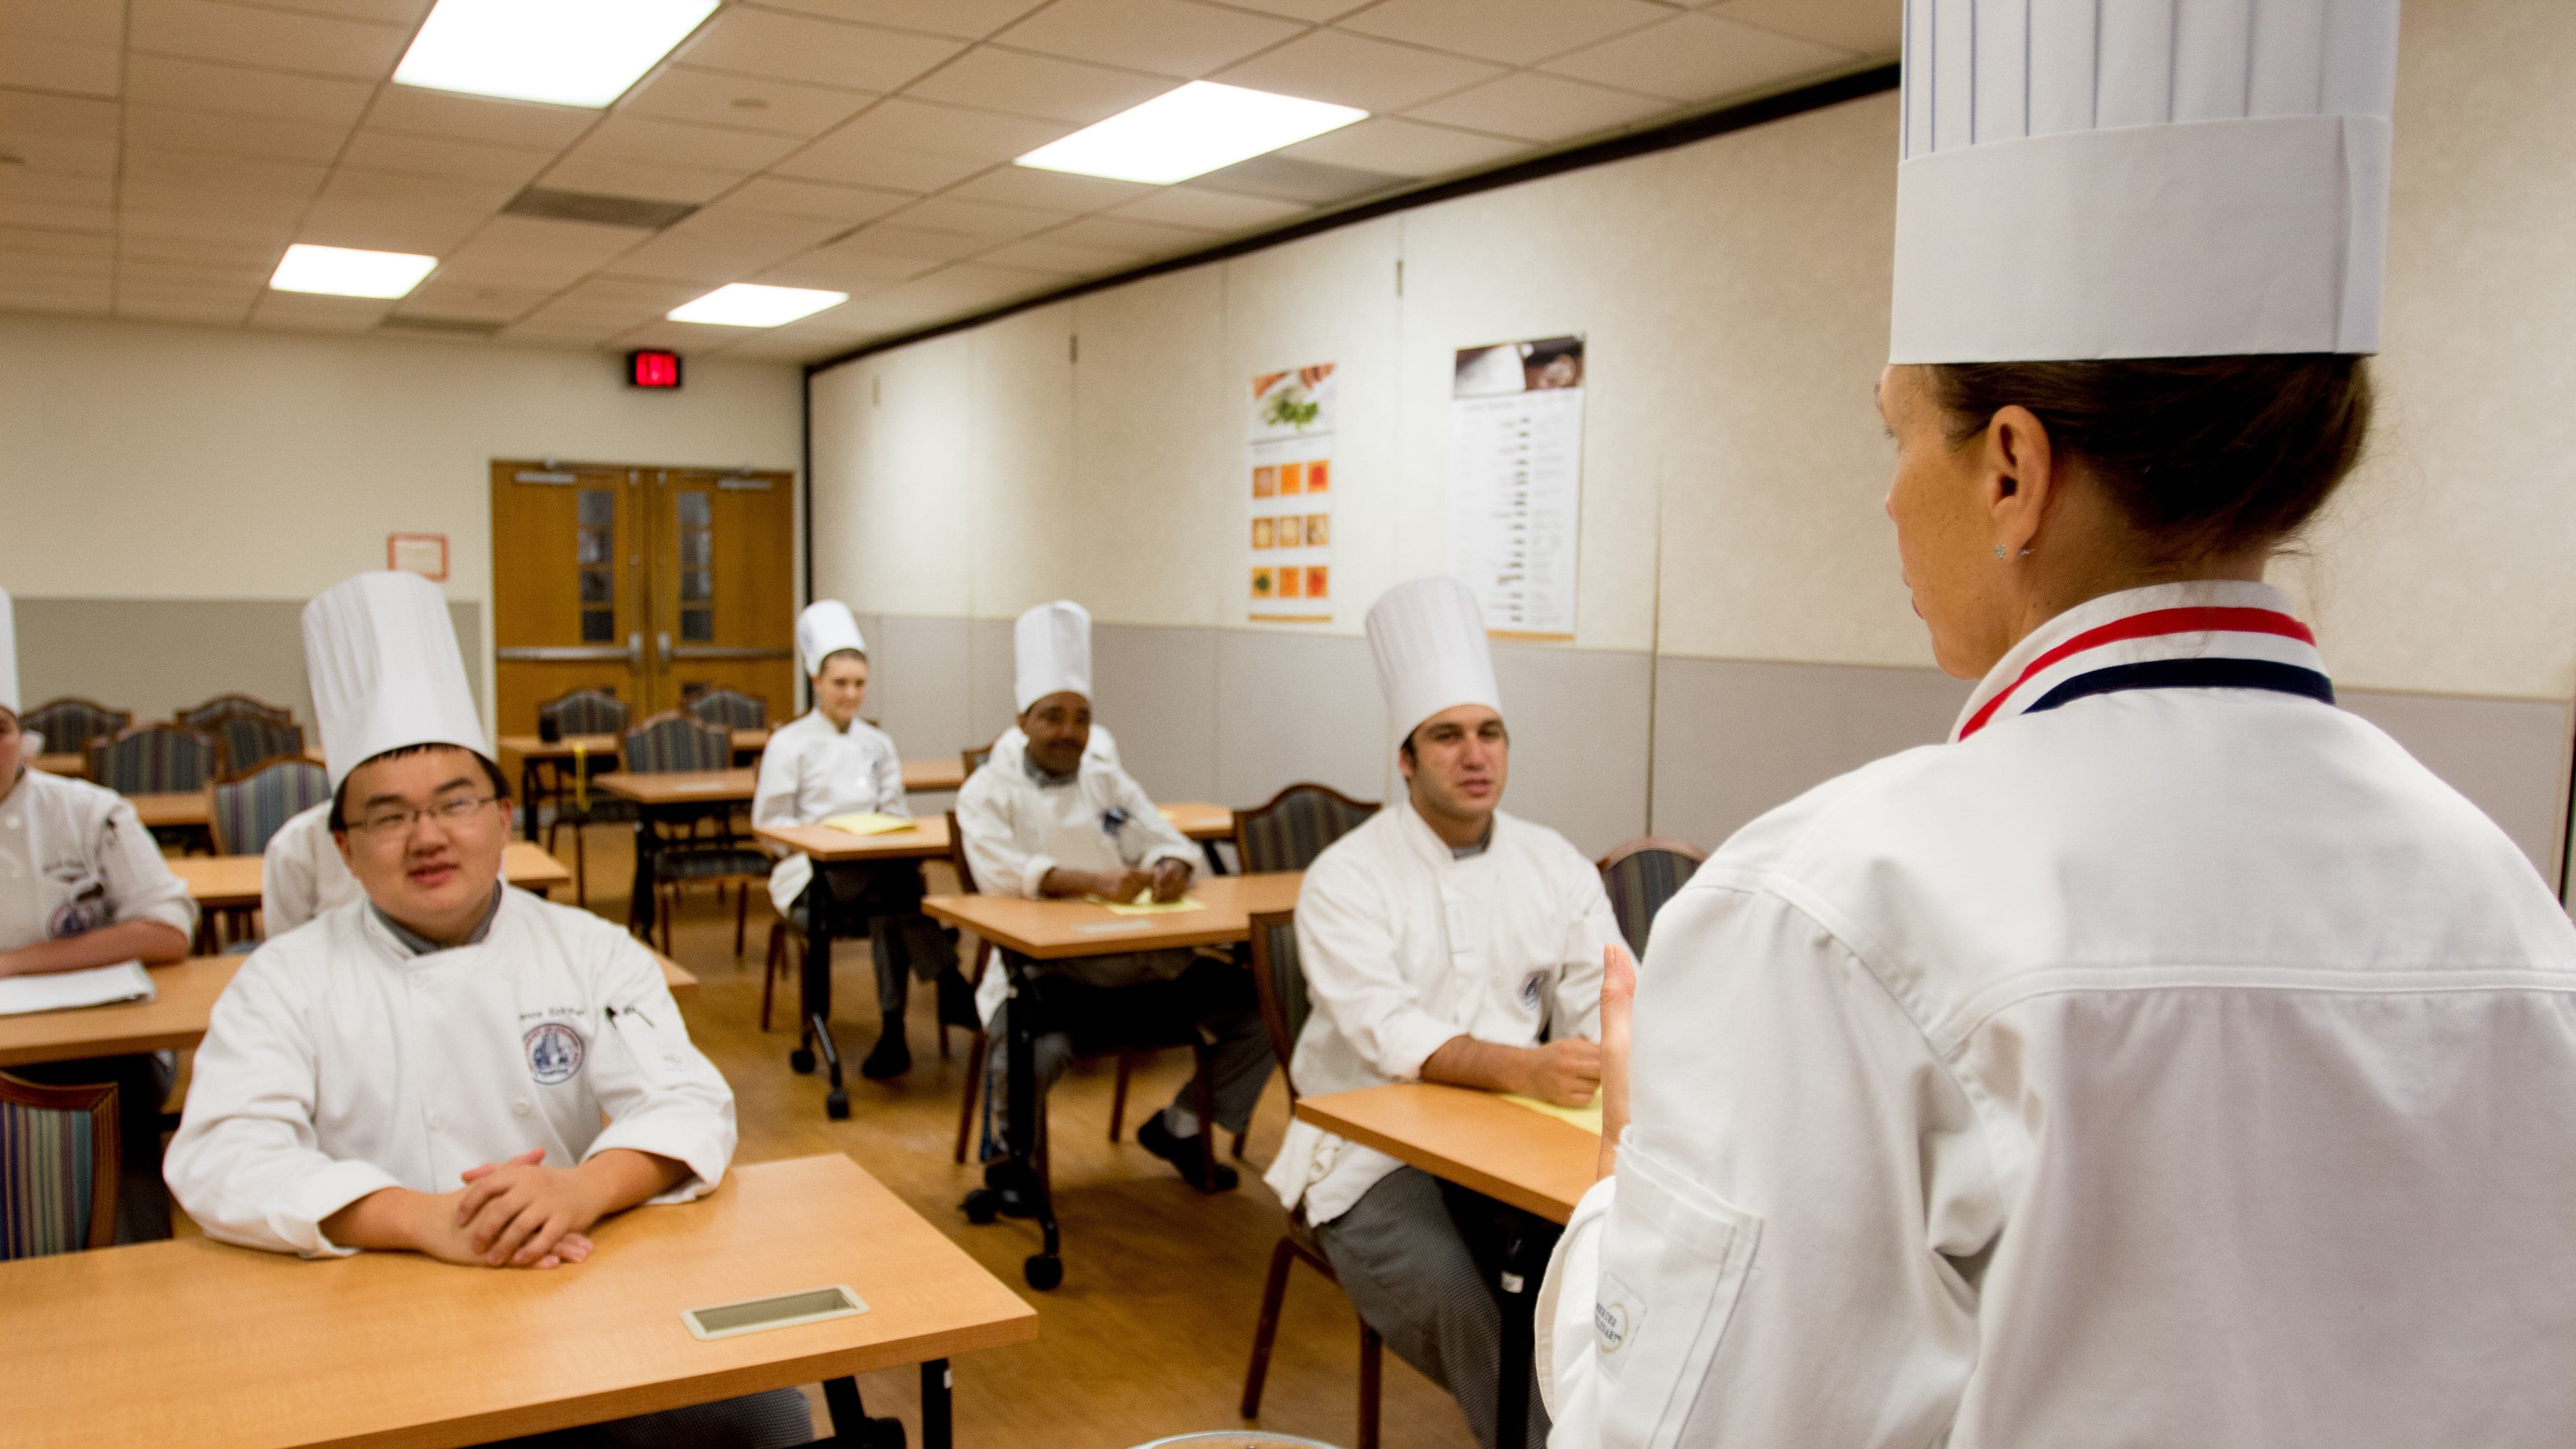 Chefs being taught in classroom